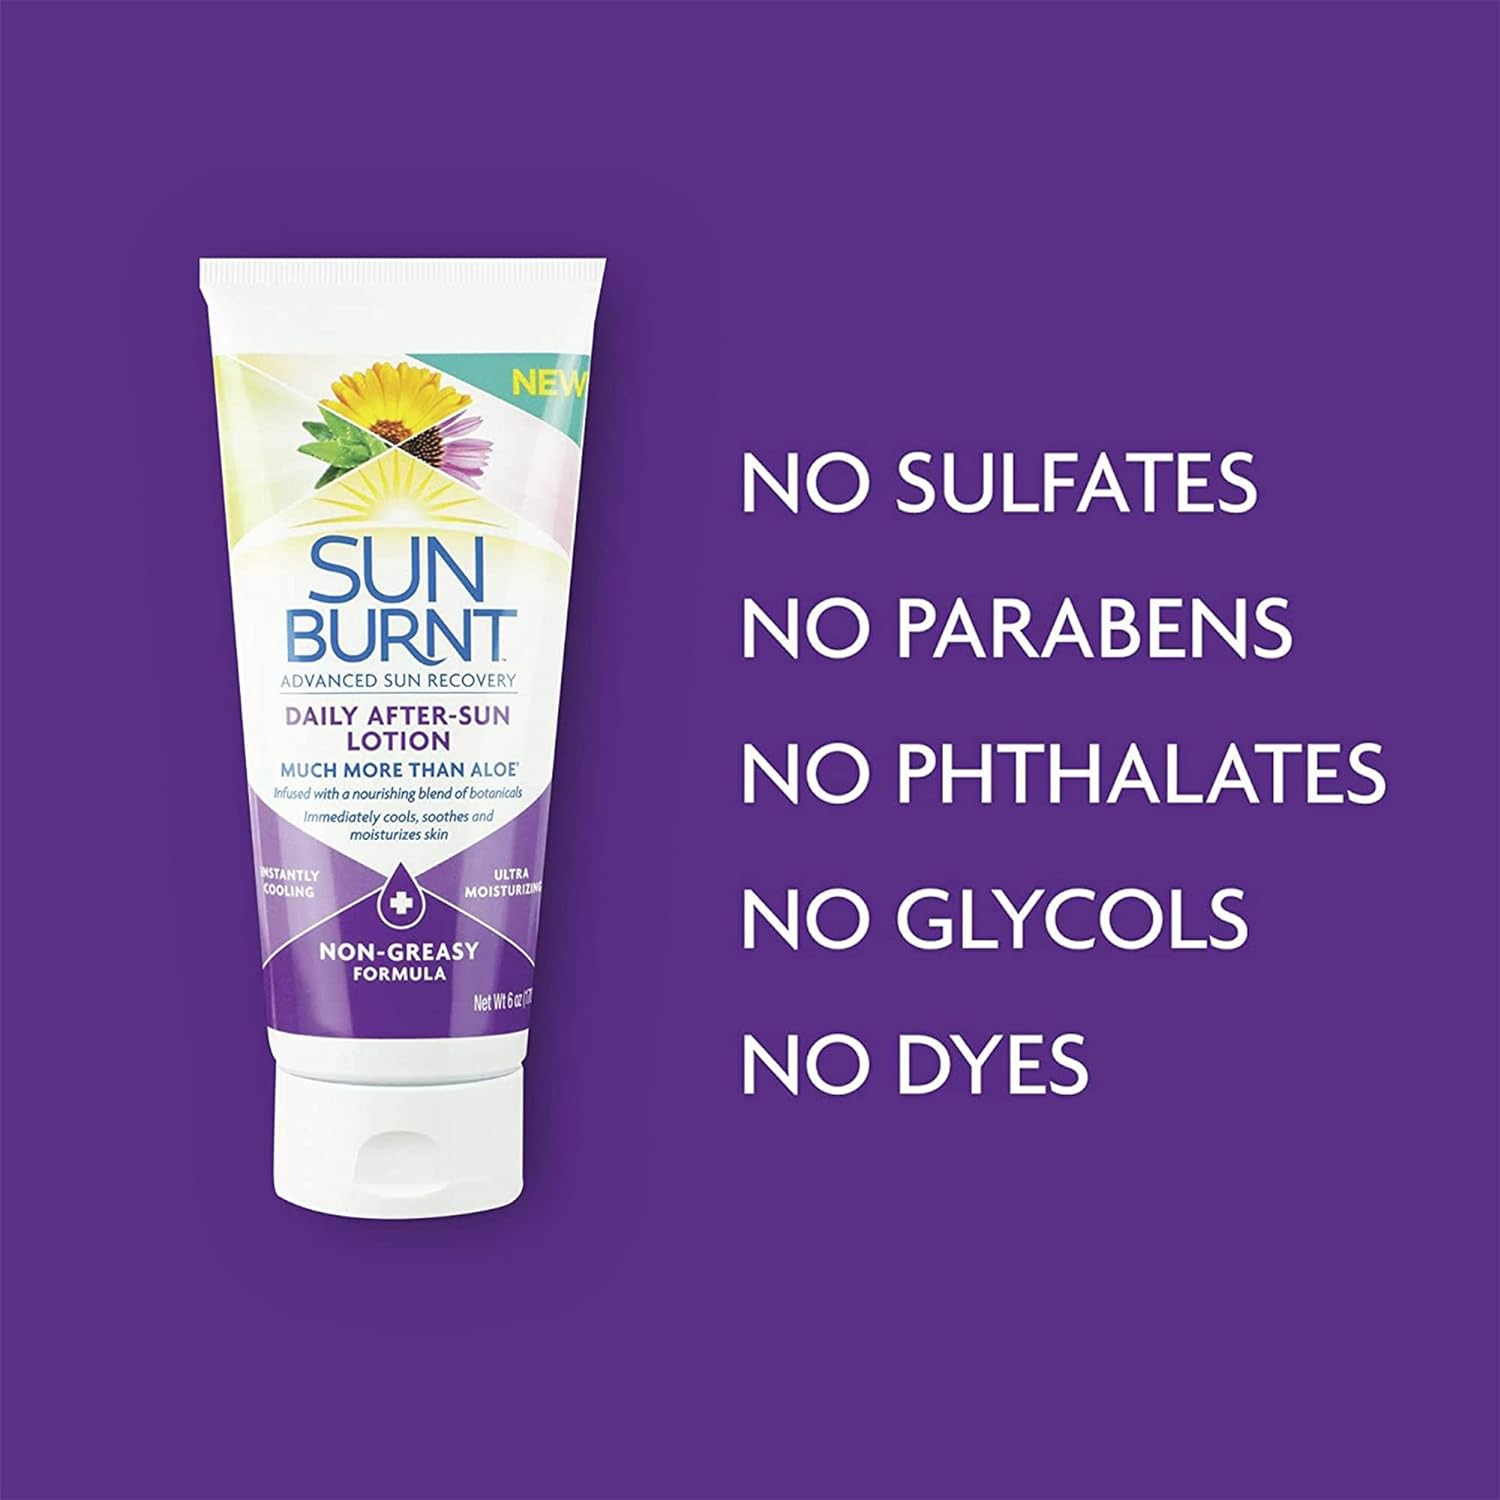 Sunburnt Advanced After-Sun Lotion, 6 Ounce : Beauty & Personal Care